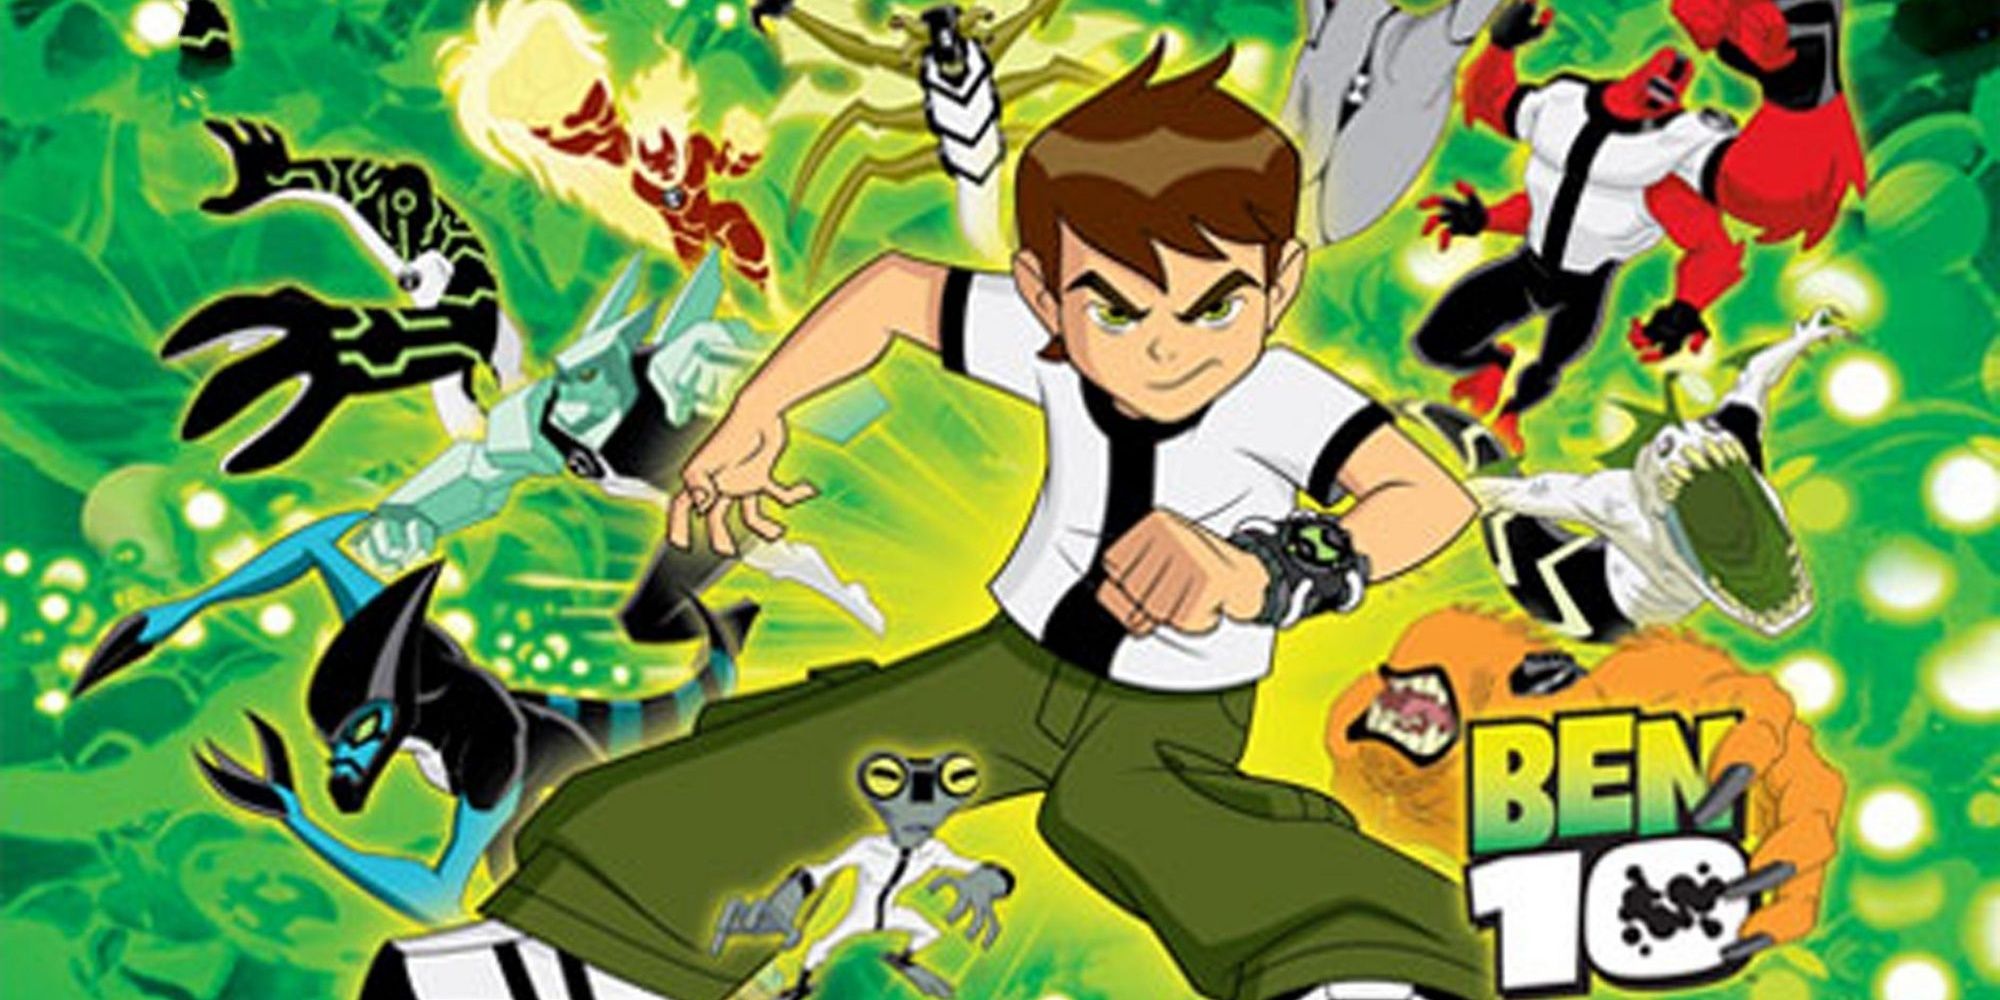 Ben 10 surrounded by various alien forms